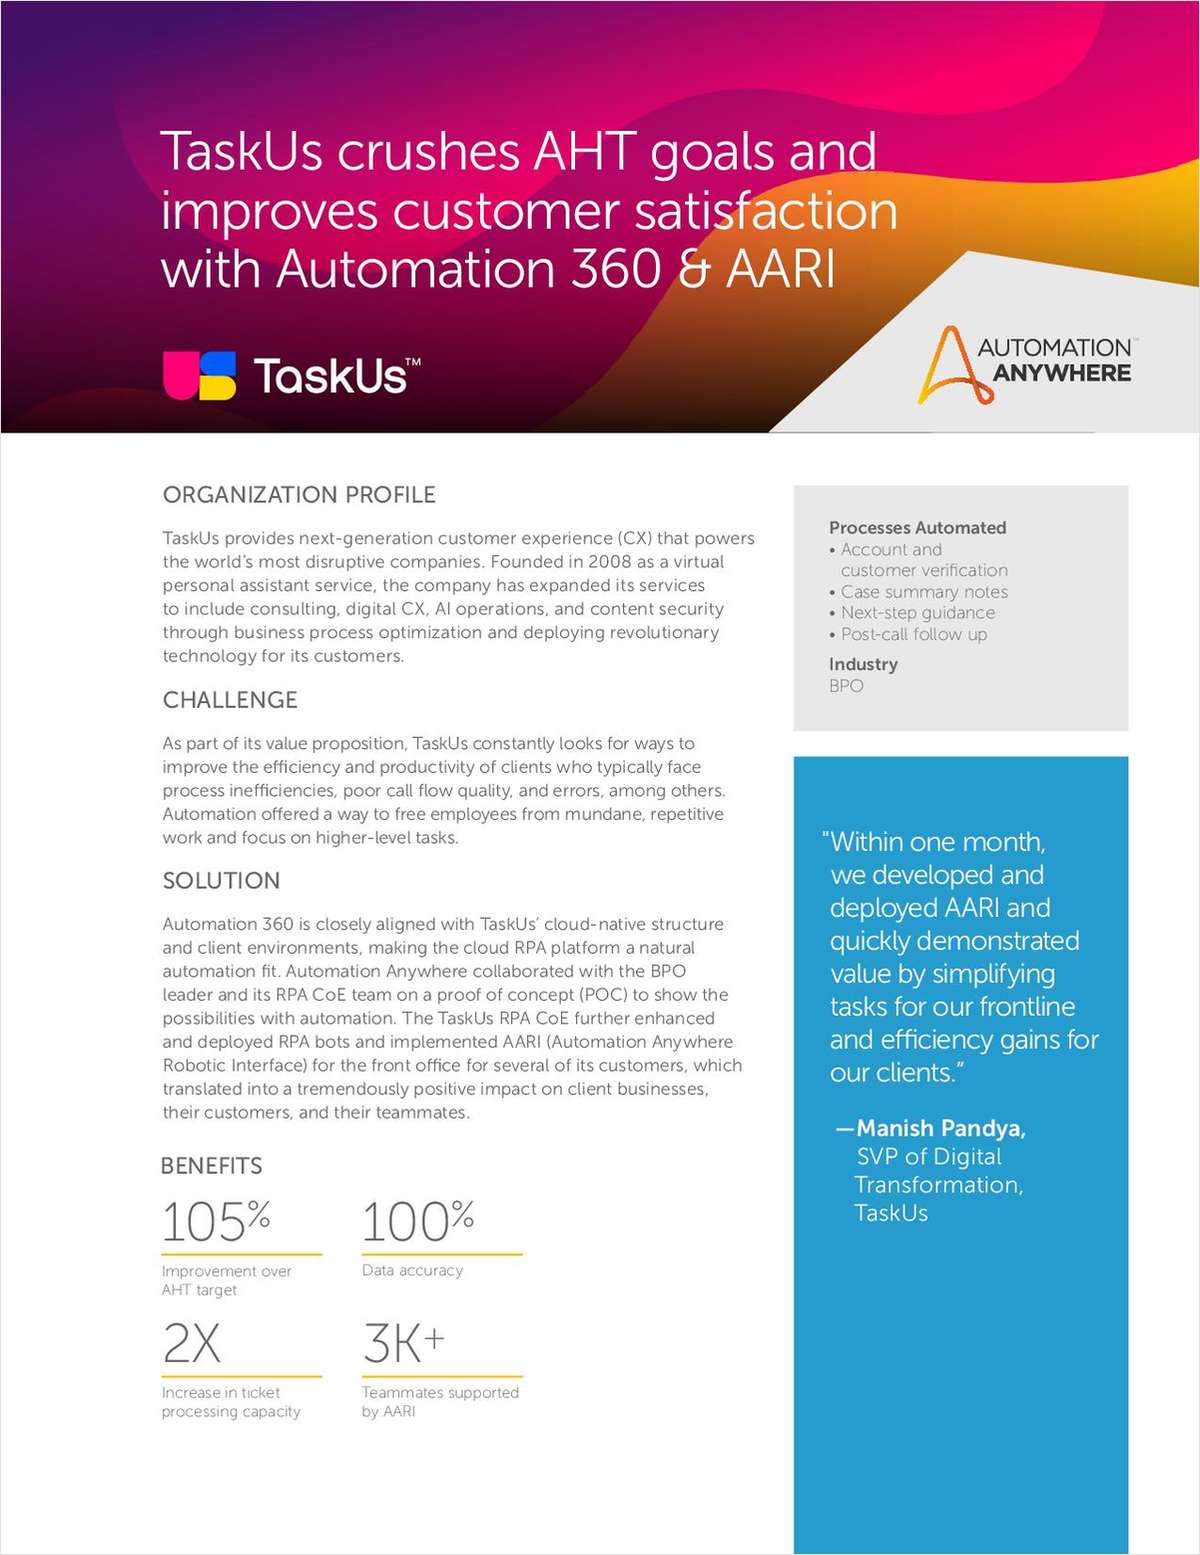 With Automation 360 & AARI, TaskUs crushes AHT goals and improves customer satisfaction